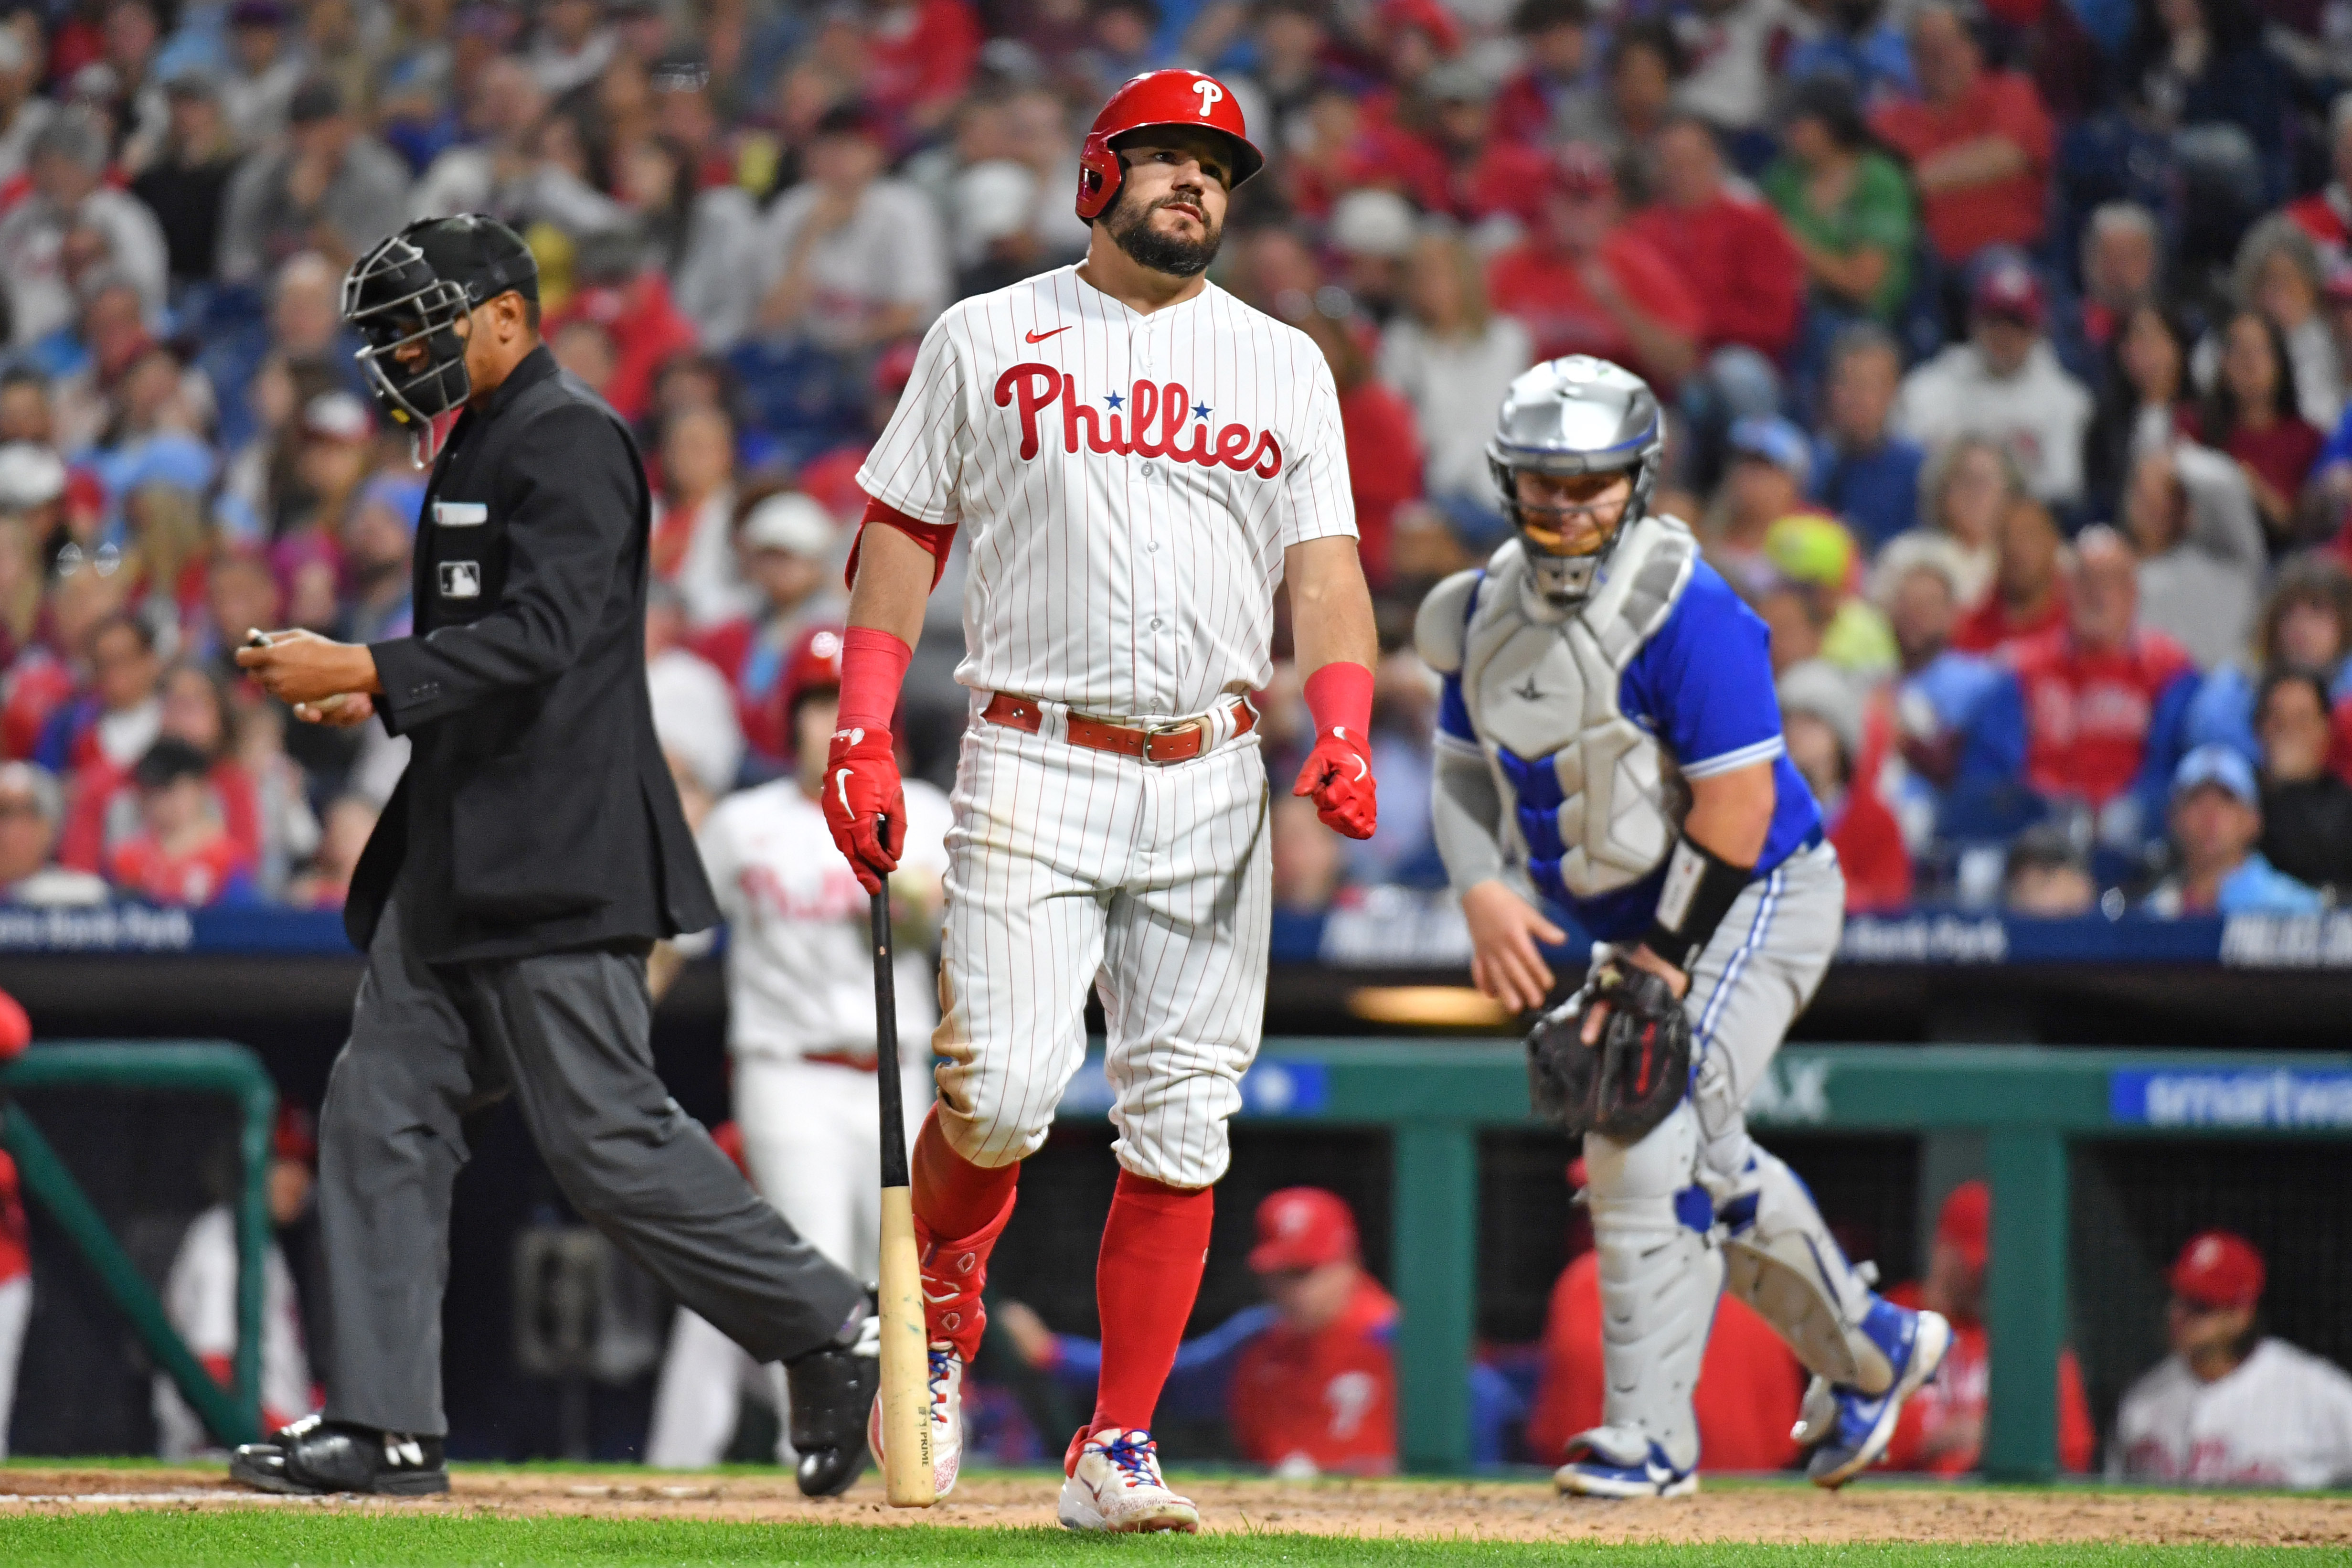 Phillies' leadoff hitter leaves sparkling first impressions on